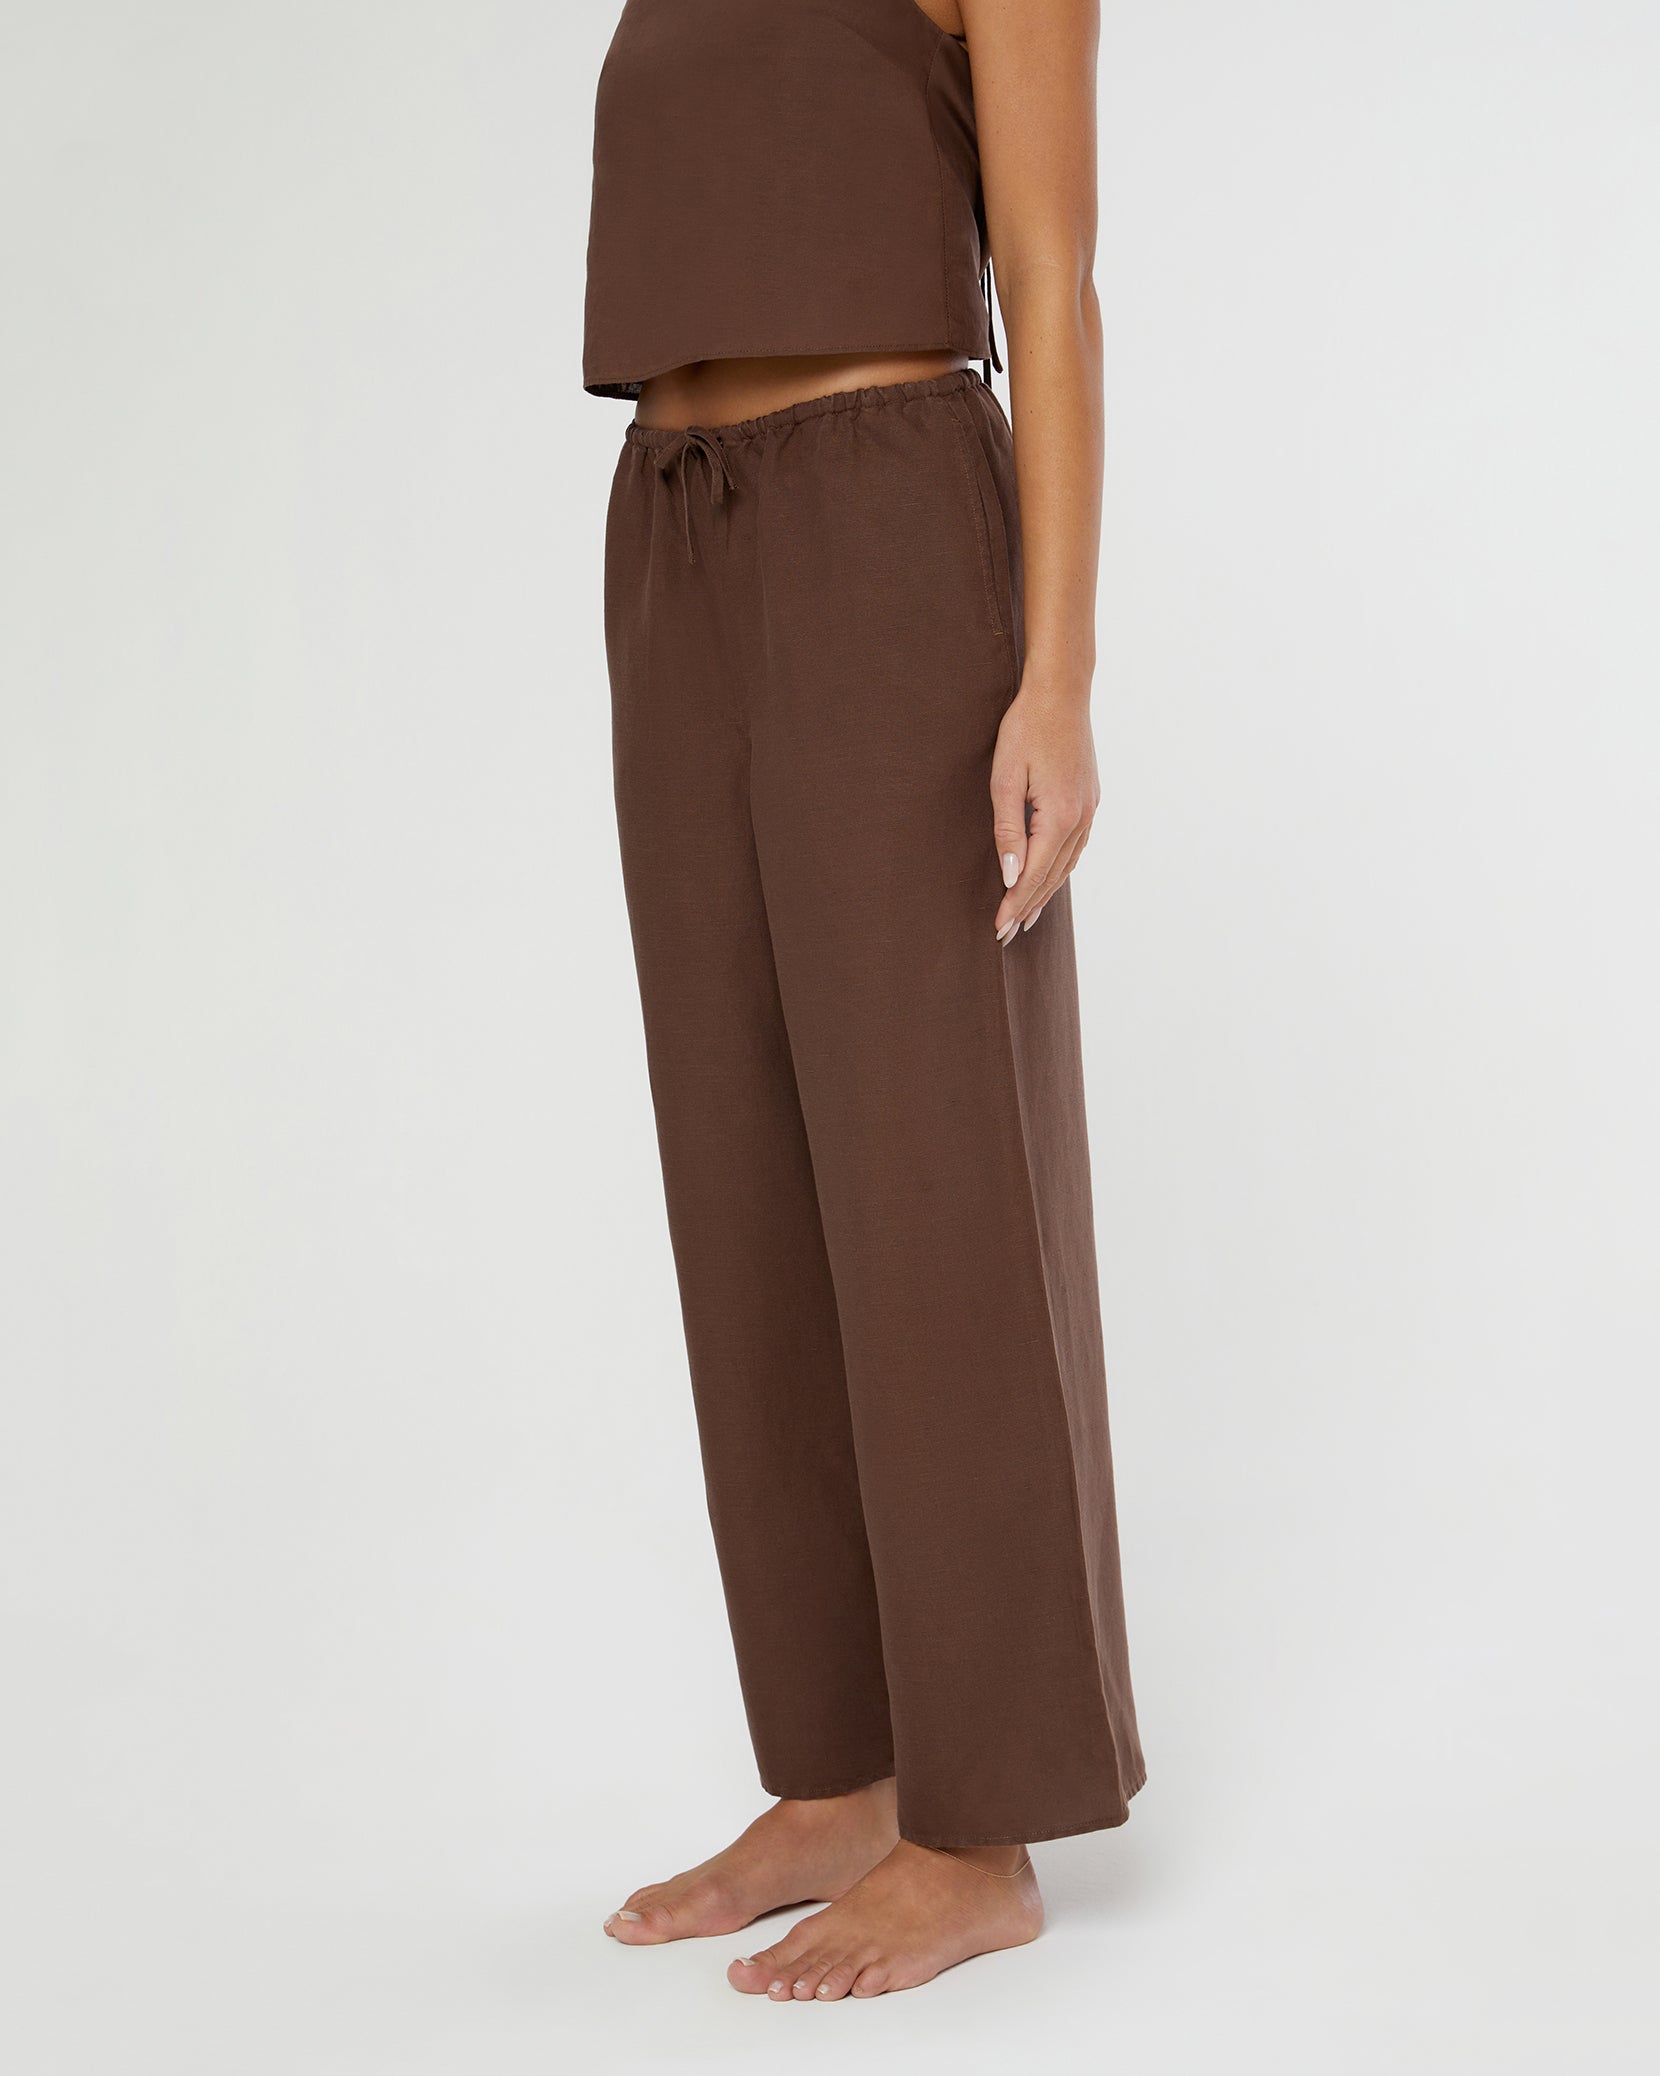 Patch Pocket Pants With Drawstring, Linen Trousers Women, Box Pleat Trousers,  Wide Leg Pants, Comfortable Linen Pants With Pockets113 